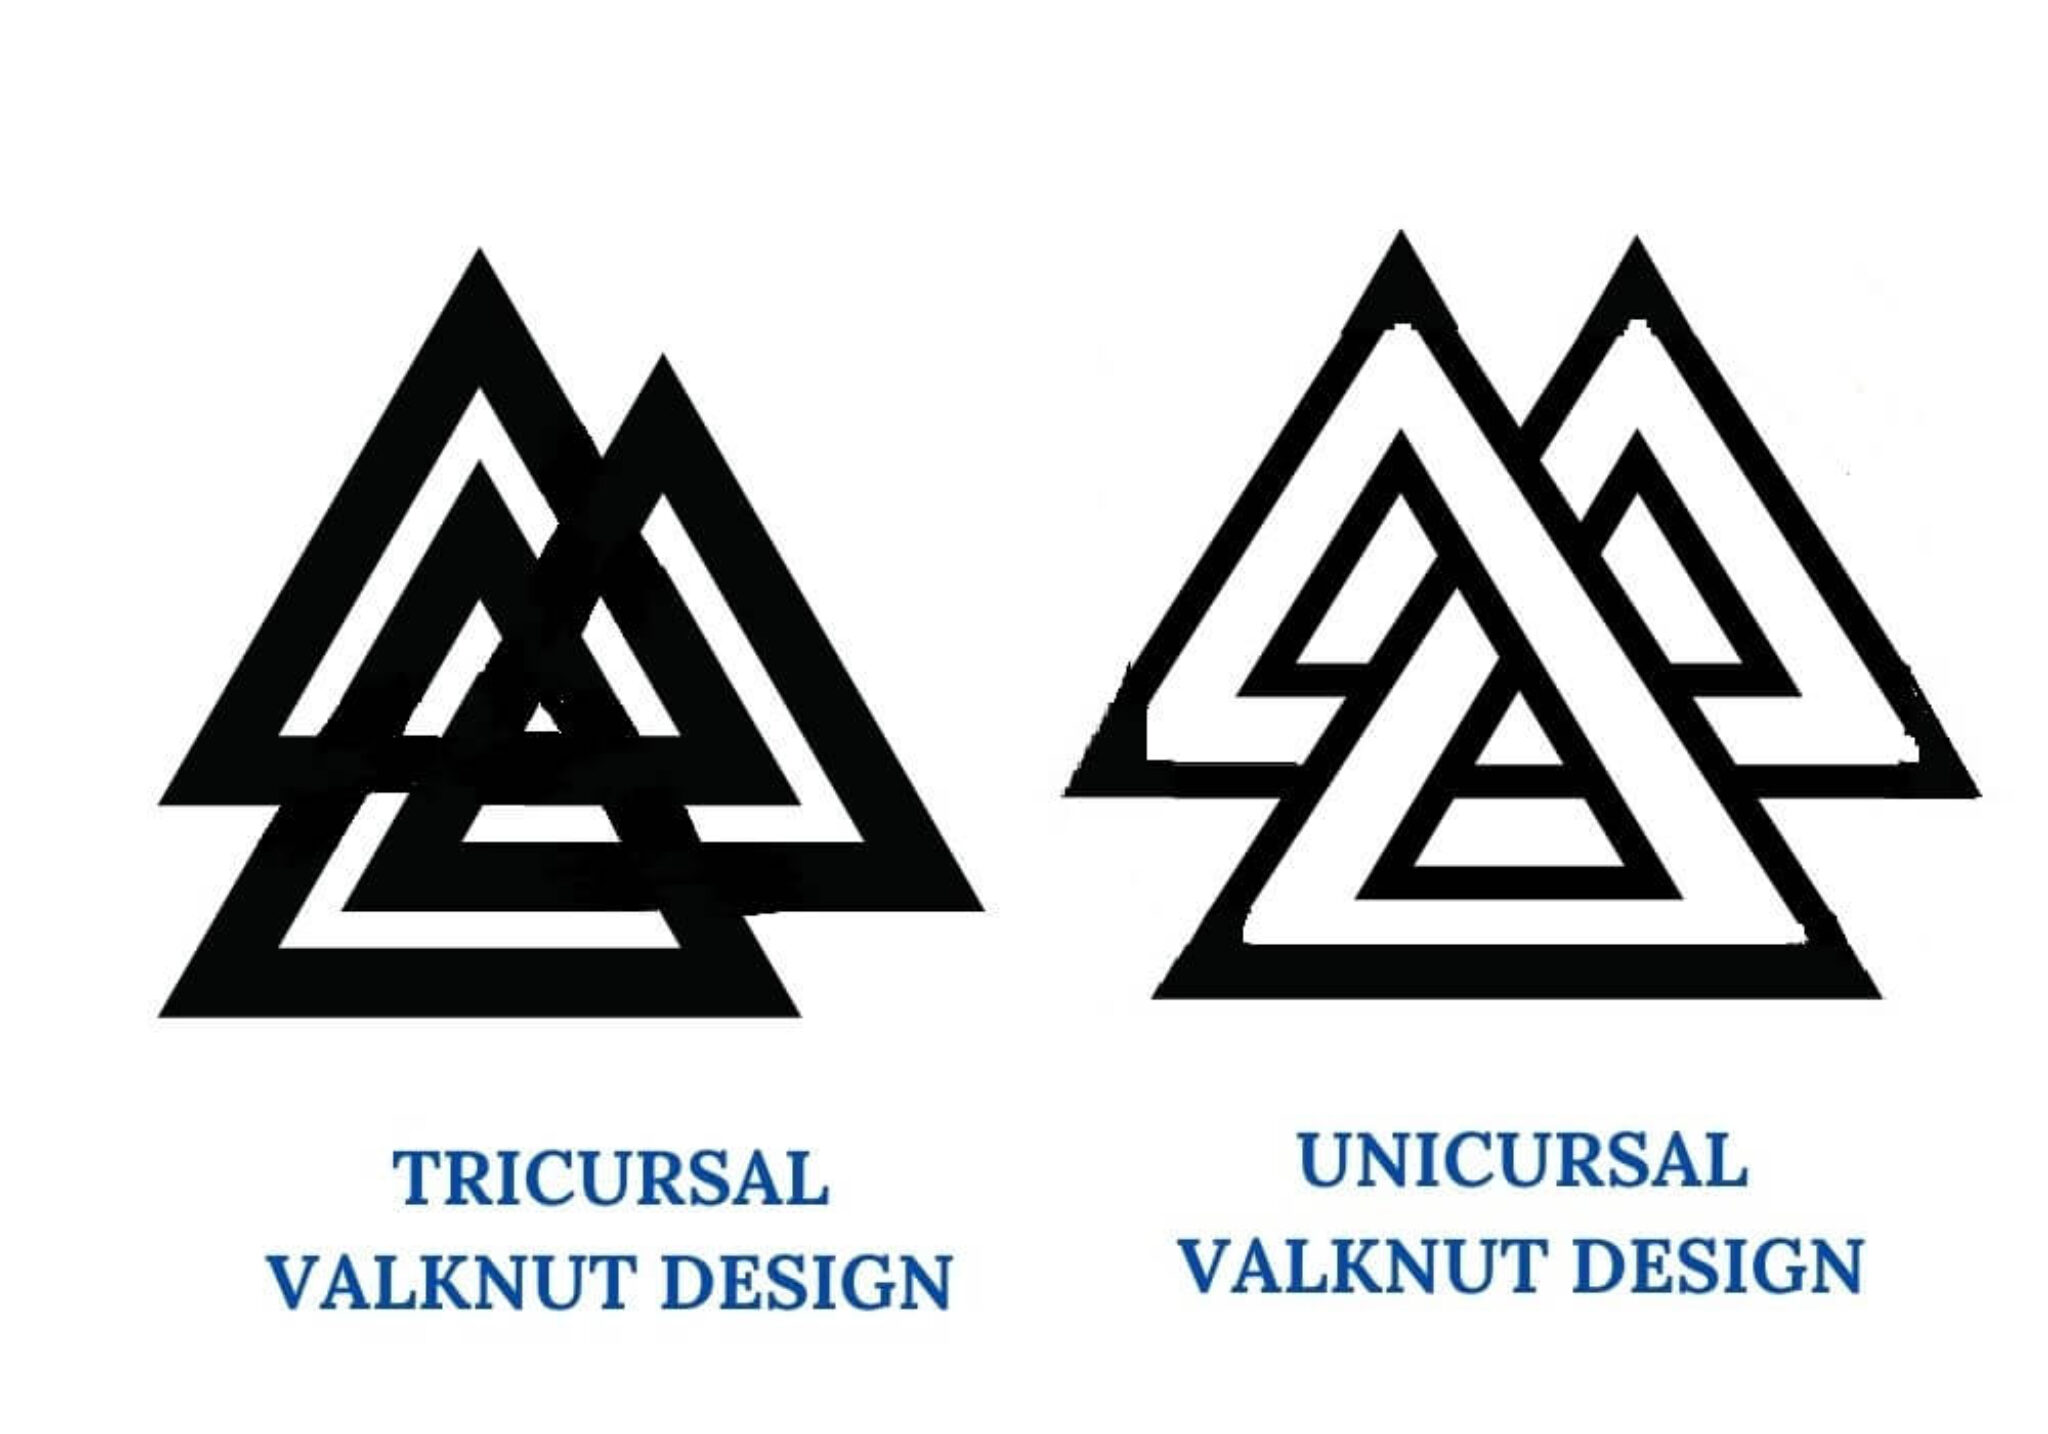 valknut triangle meaning